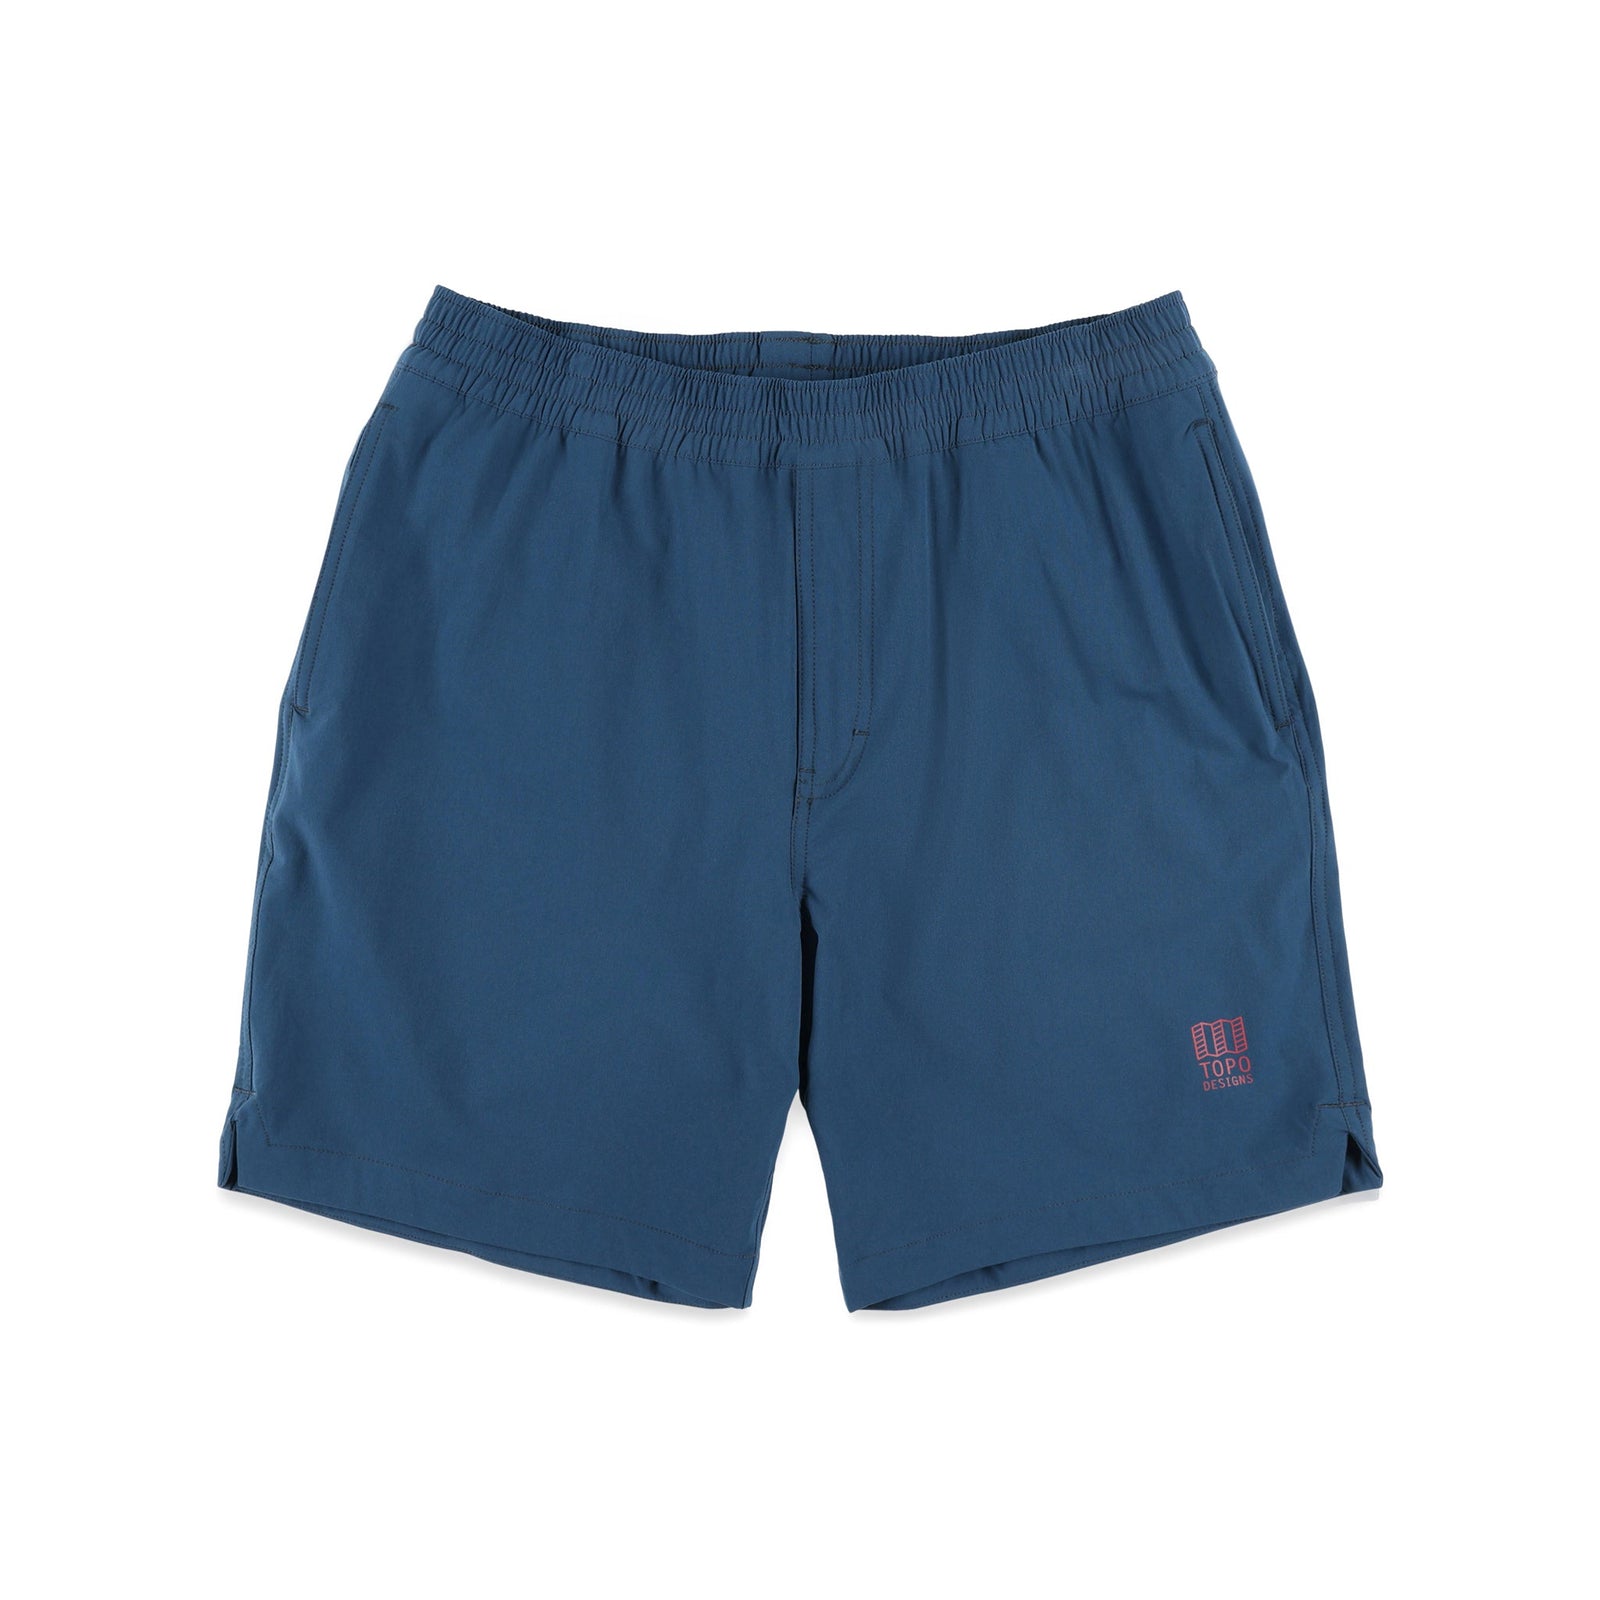 Topo Designs Men's Global lightweight quick dry travel Shorts in "Pond Blue".